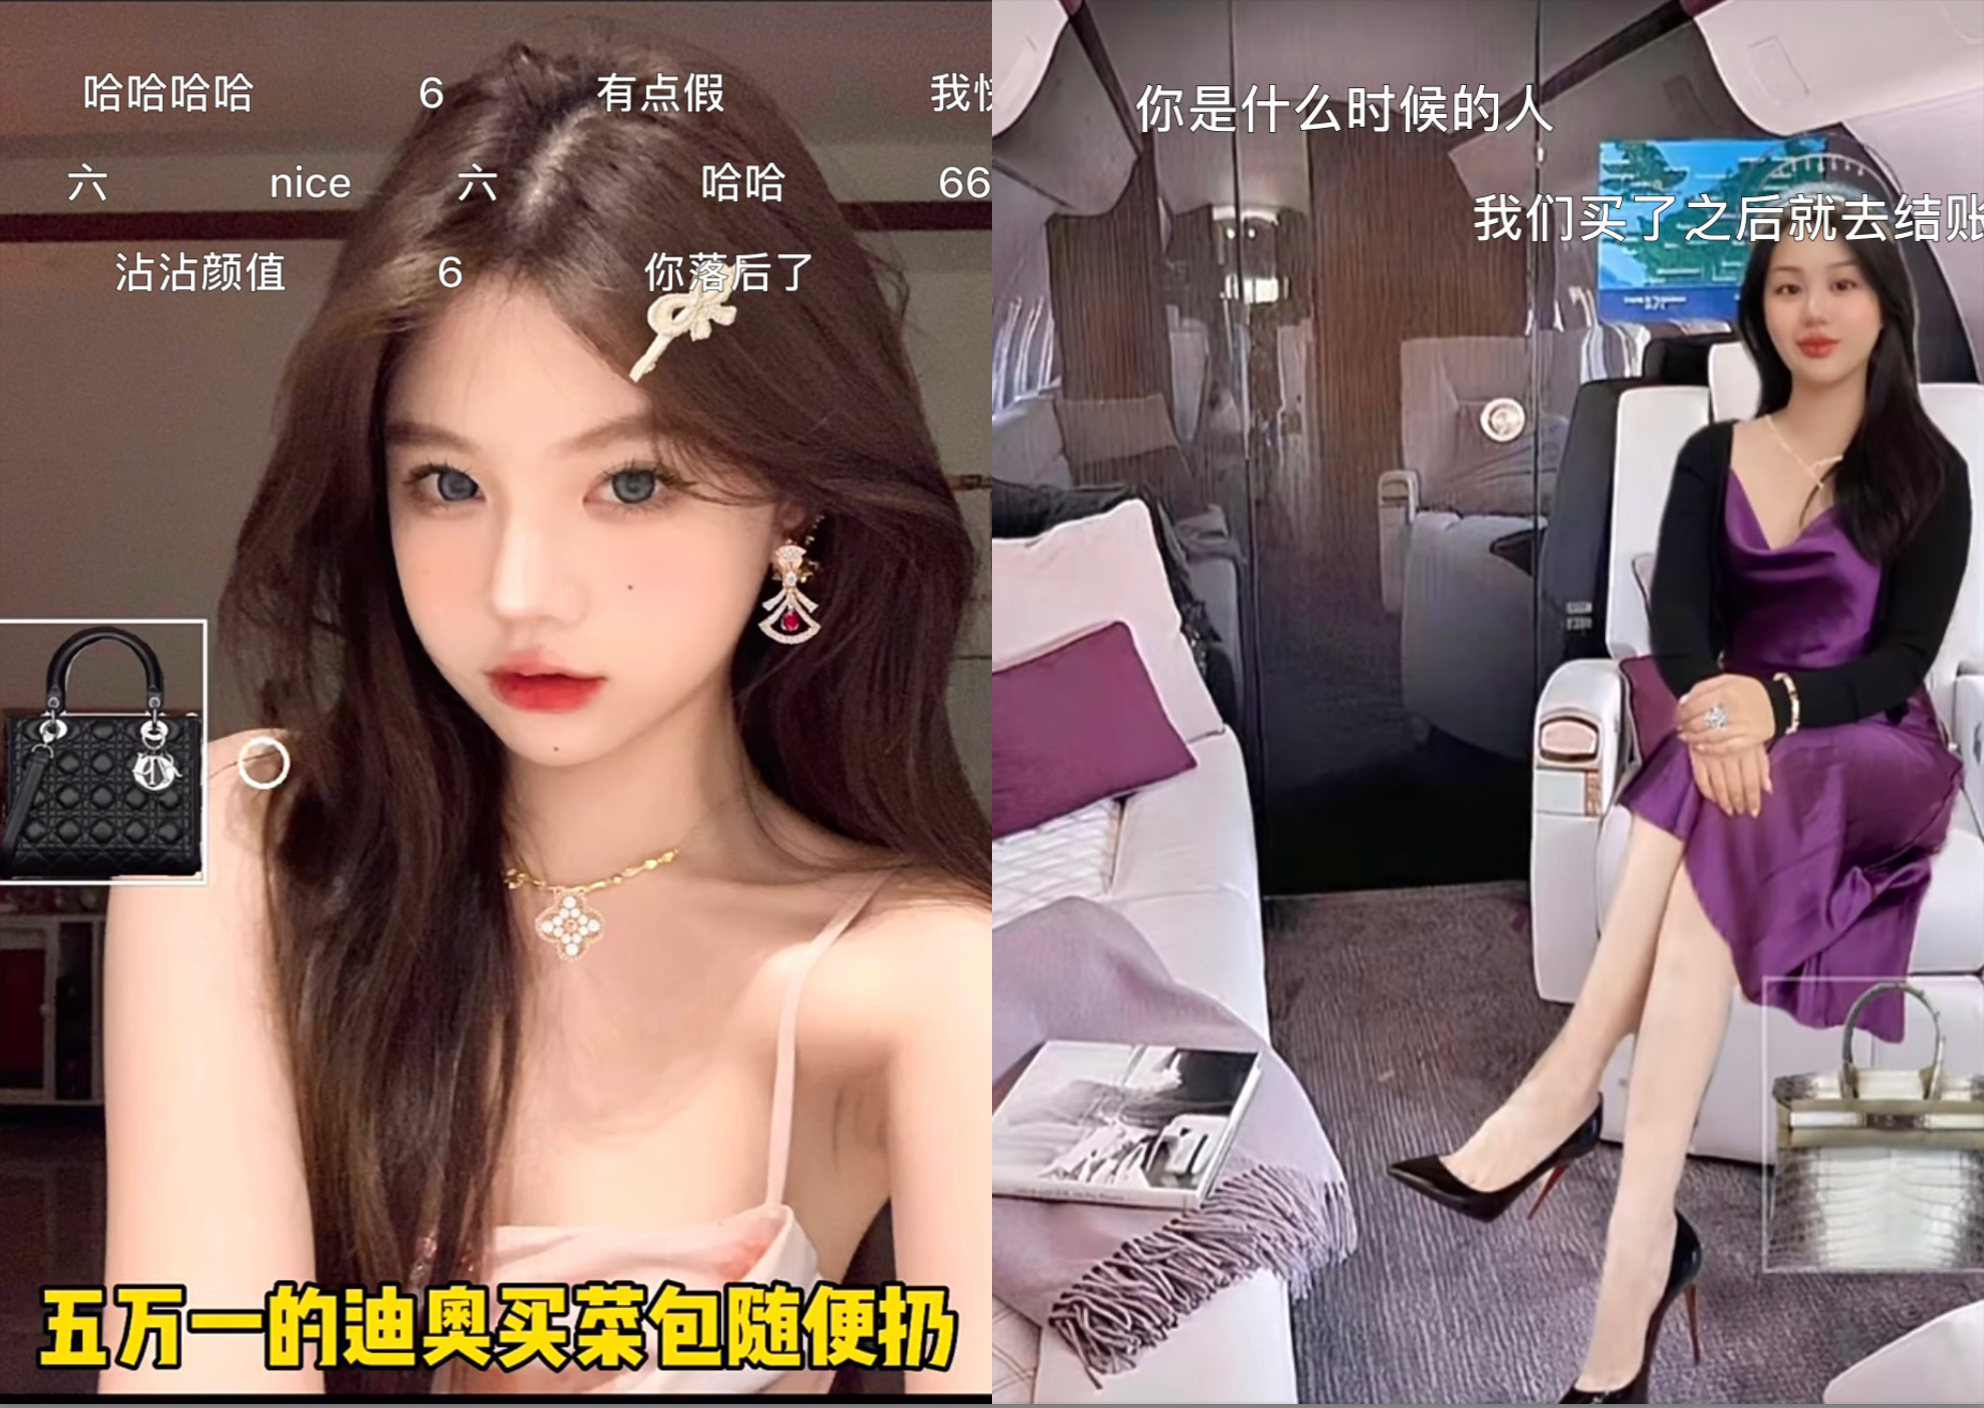 From Chanel lipsticks and Dior handbags to private jets, China’s hyper-online netizens have found a cheat code to living luxuriously amid an economic slowdown. Cue, 'virtual bling.' Photo: Xiaohongshu